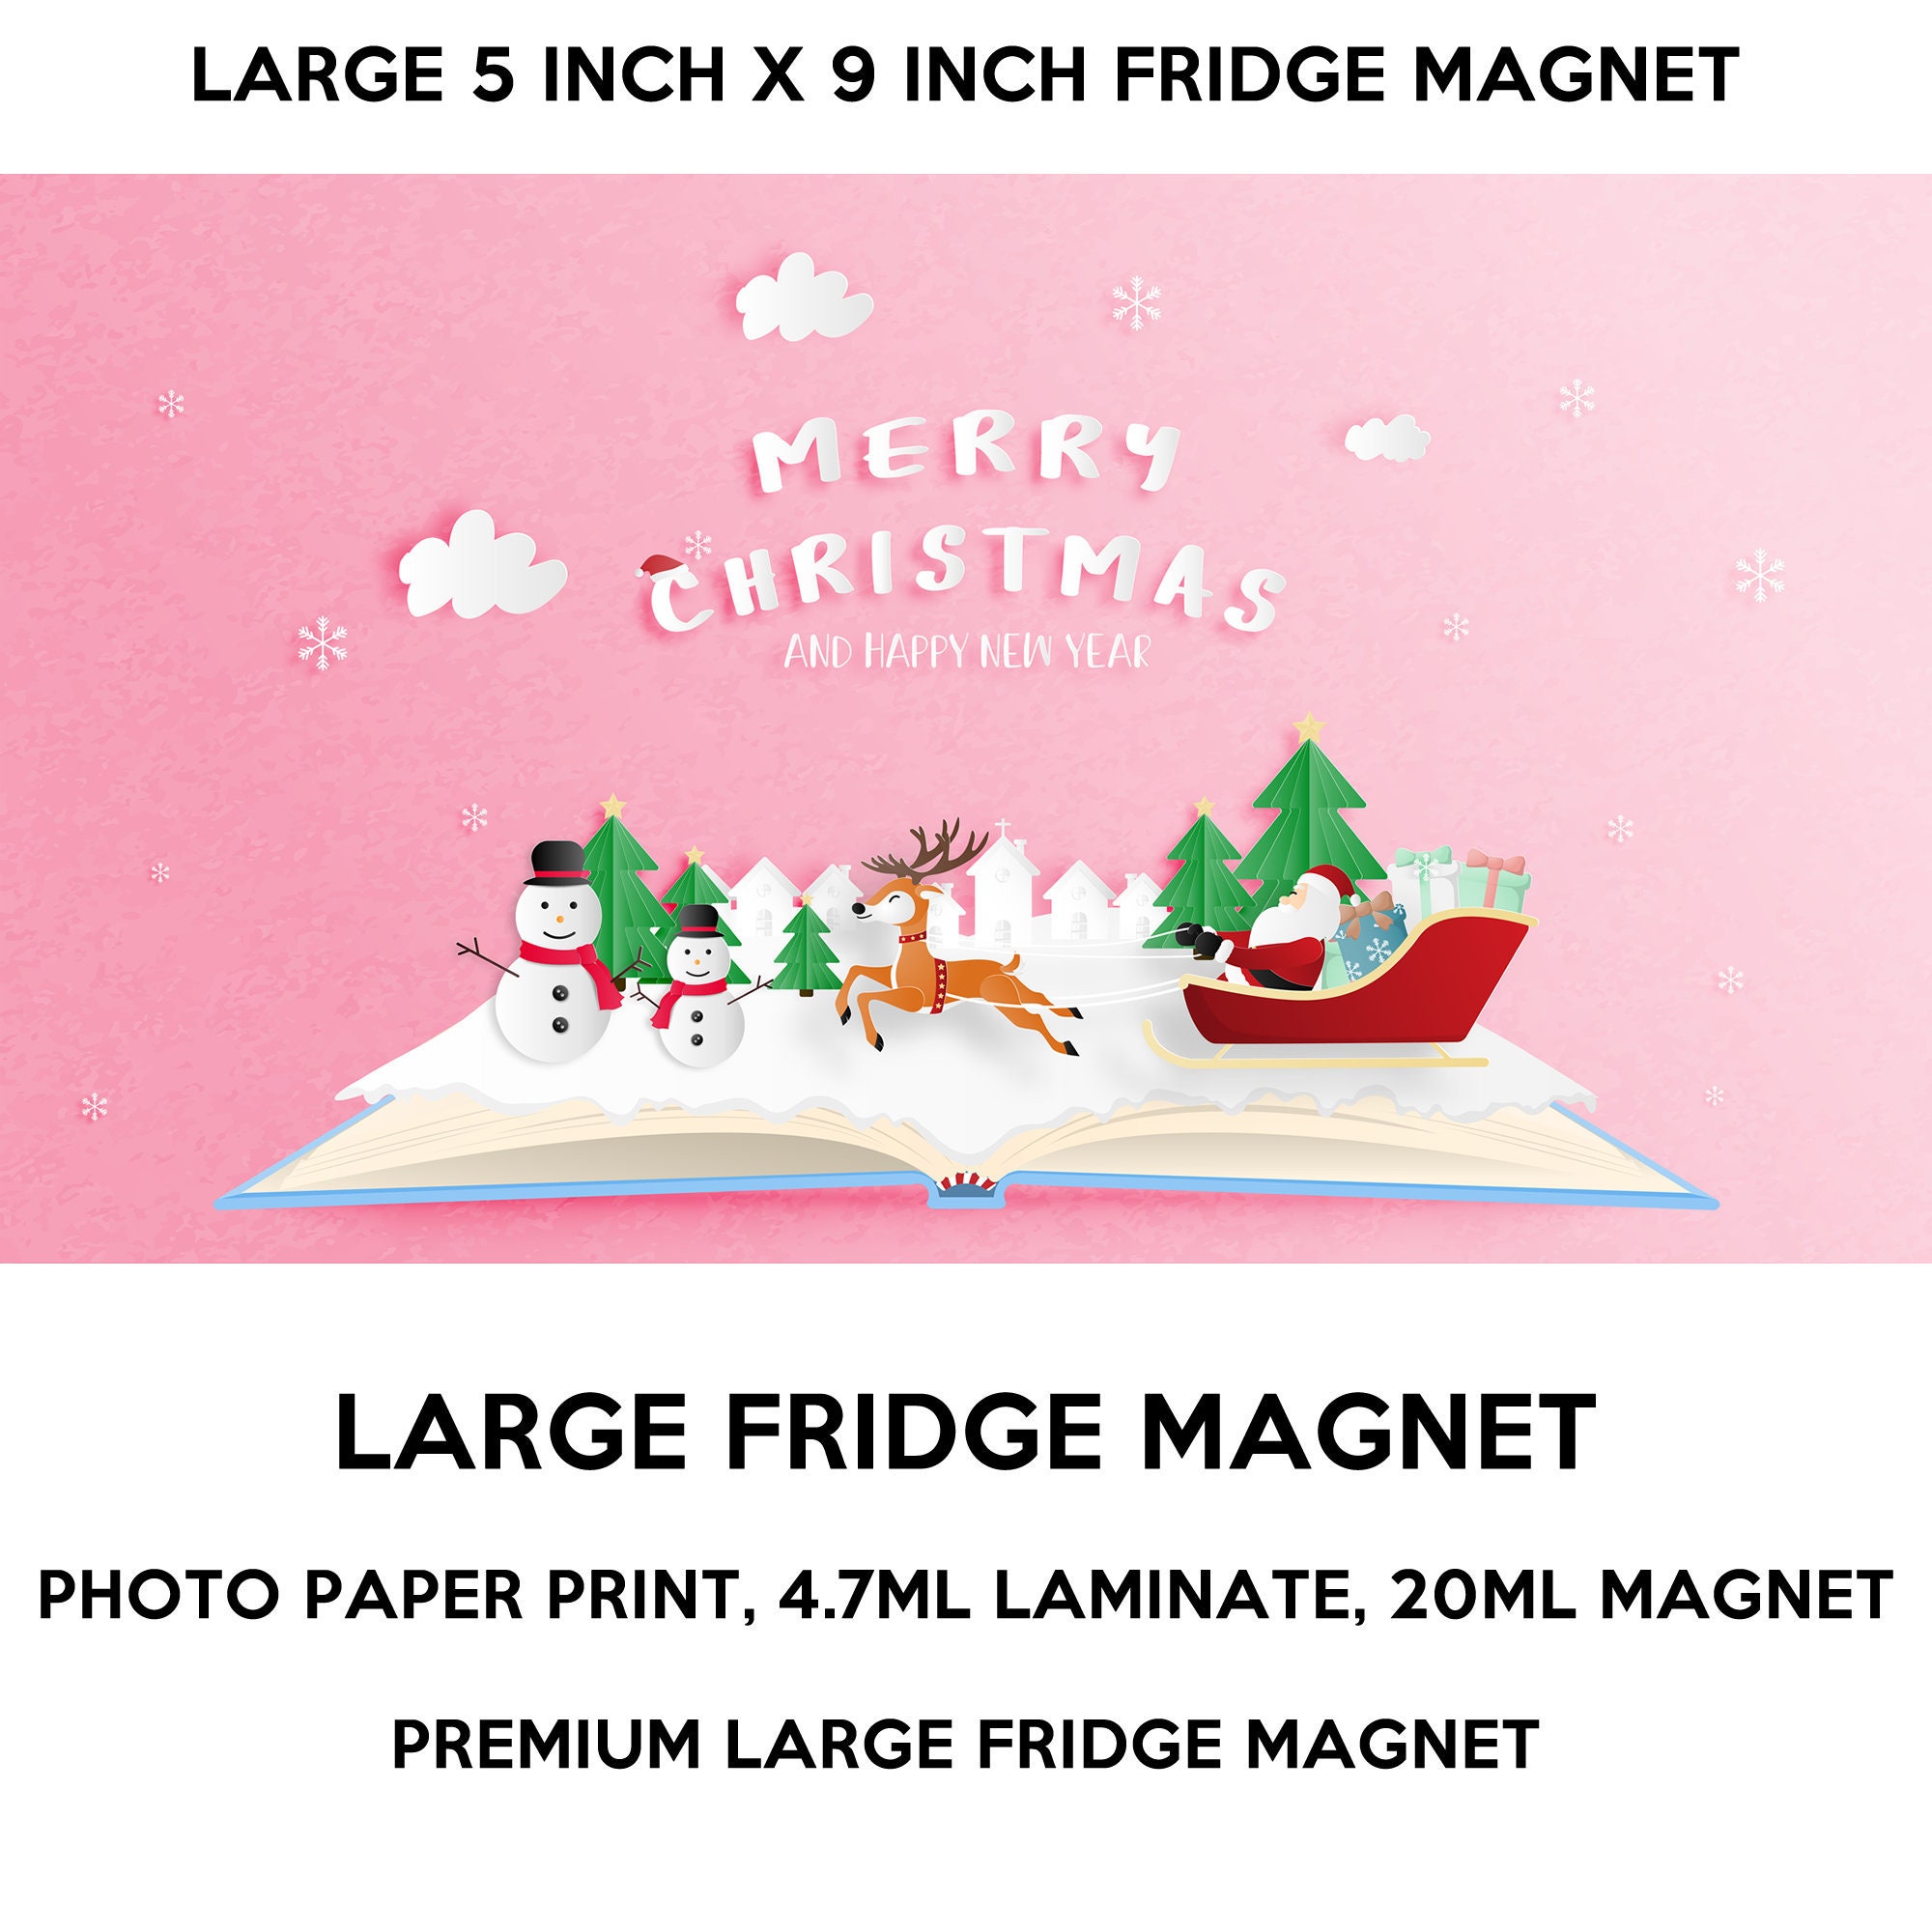 Christmas fridge magnet, large 5x9 inch premium fridge magnet that stands out this holiday season